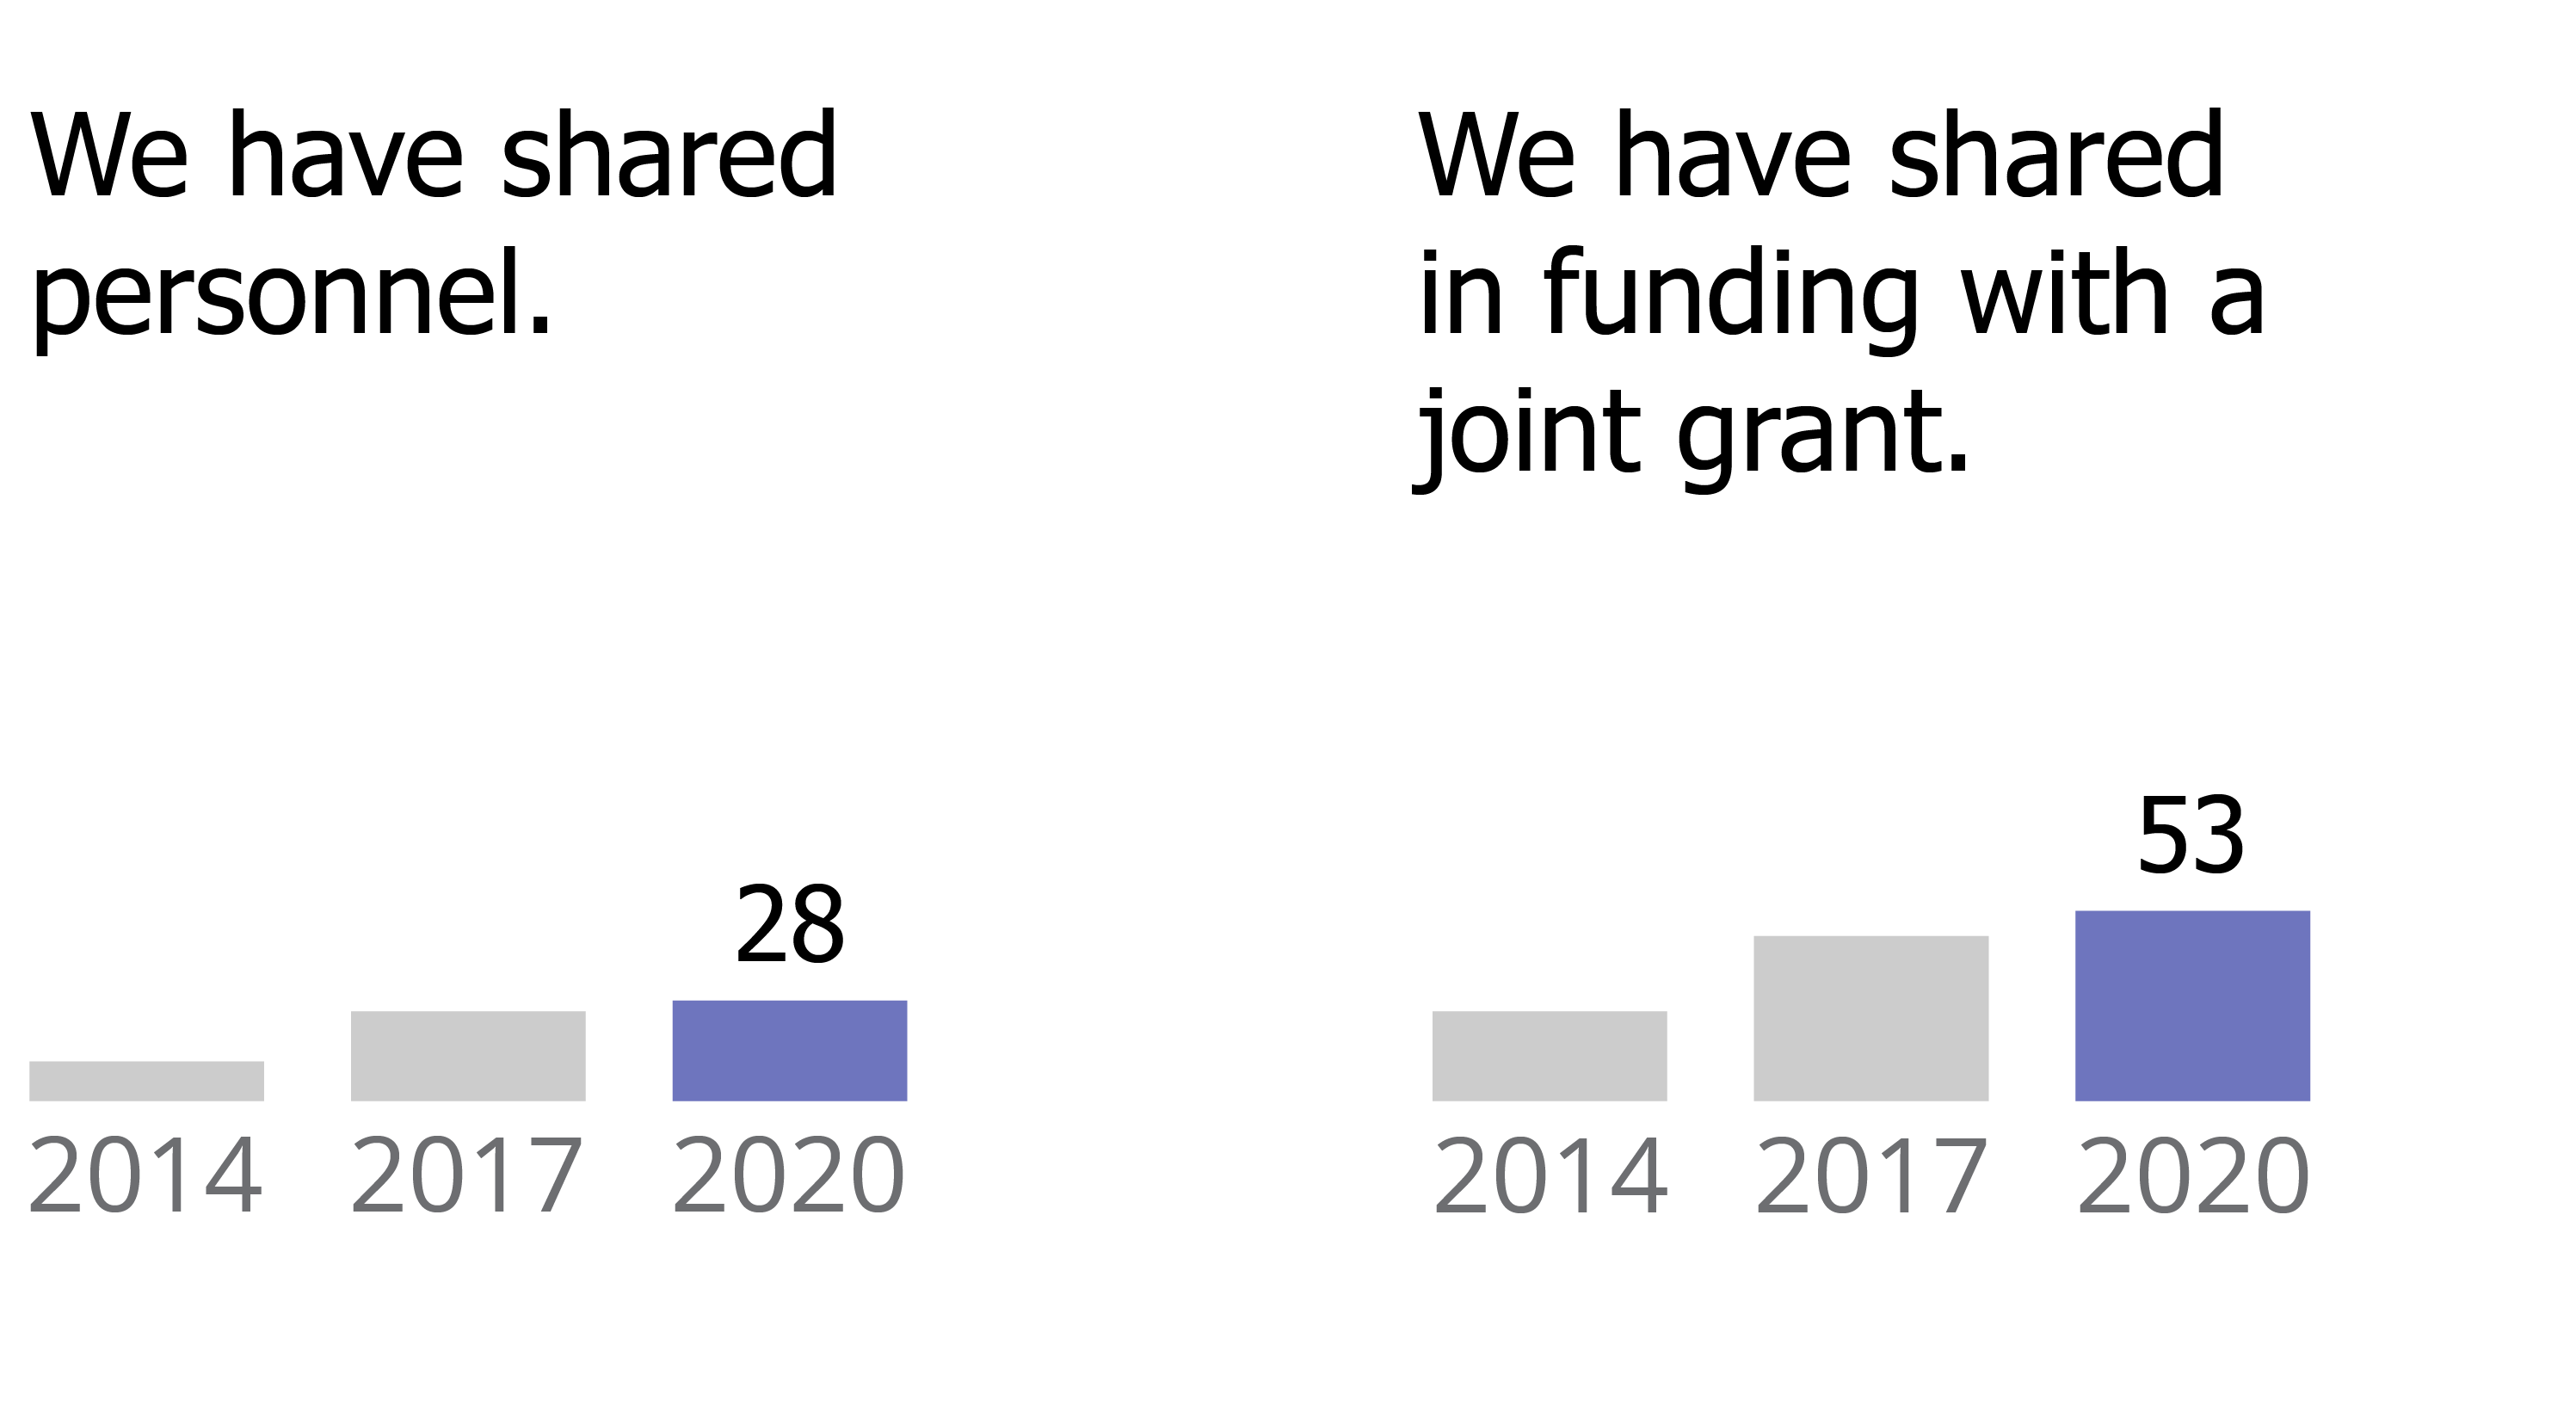 28 organizations reported sharing personnel in 2020 compared to 11 in 2014. 53 reported shared funding with a joint grant in 2020 compared to 25 in 2014.